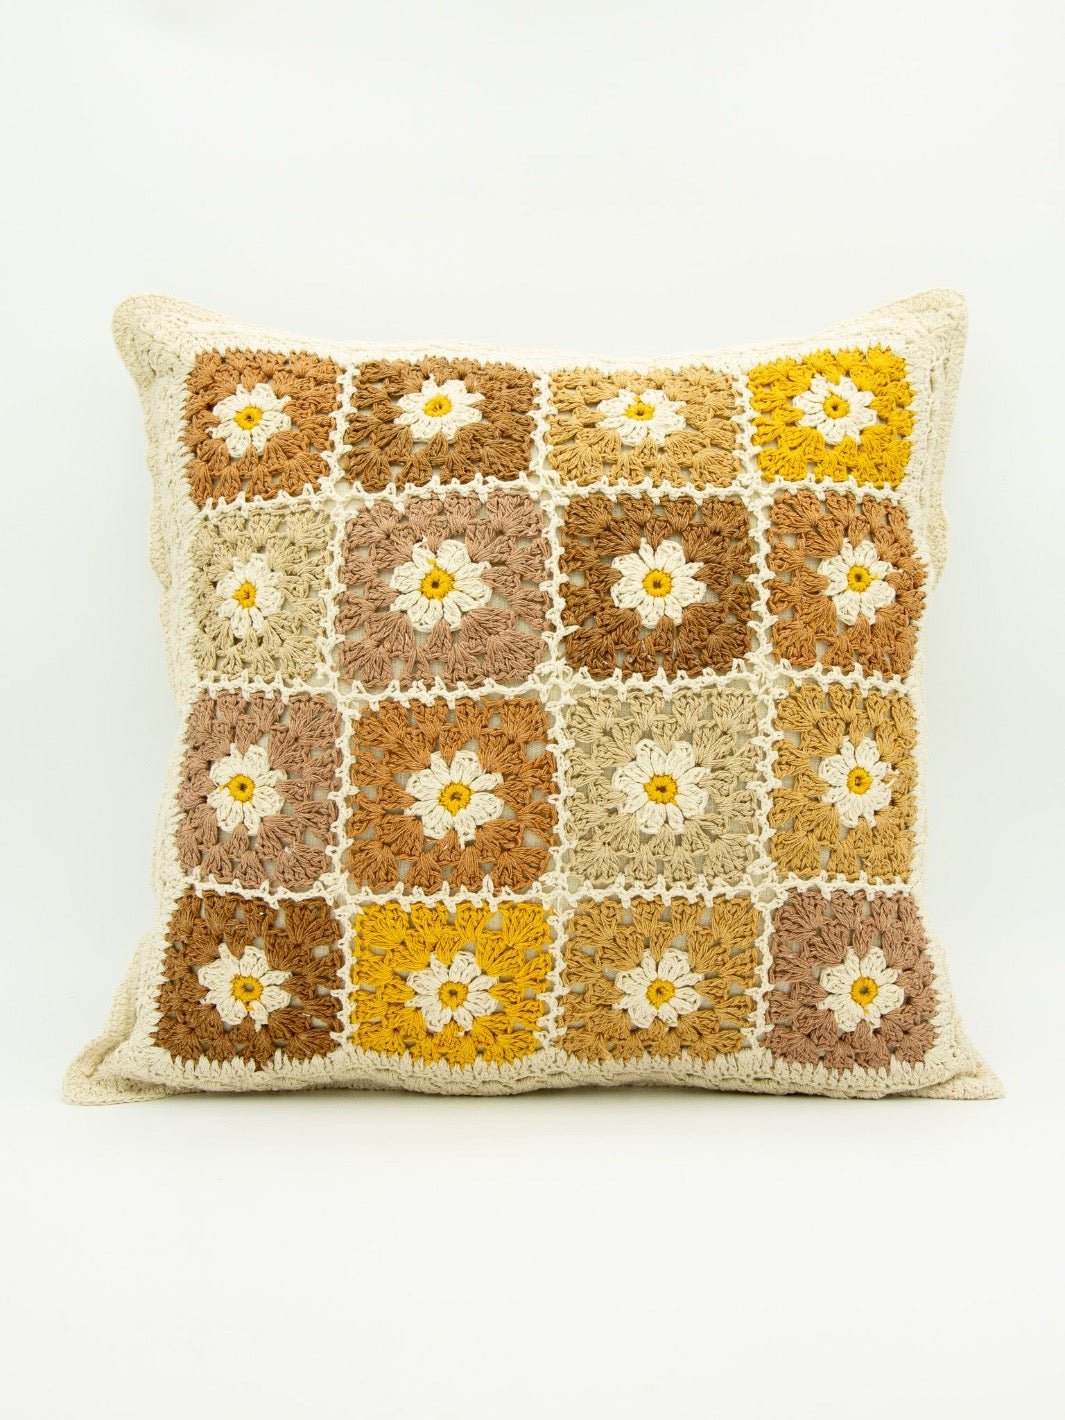 Crocheted Granny Square Pillow - Heyday